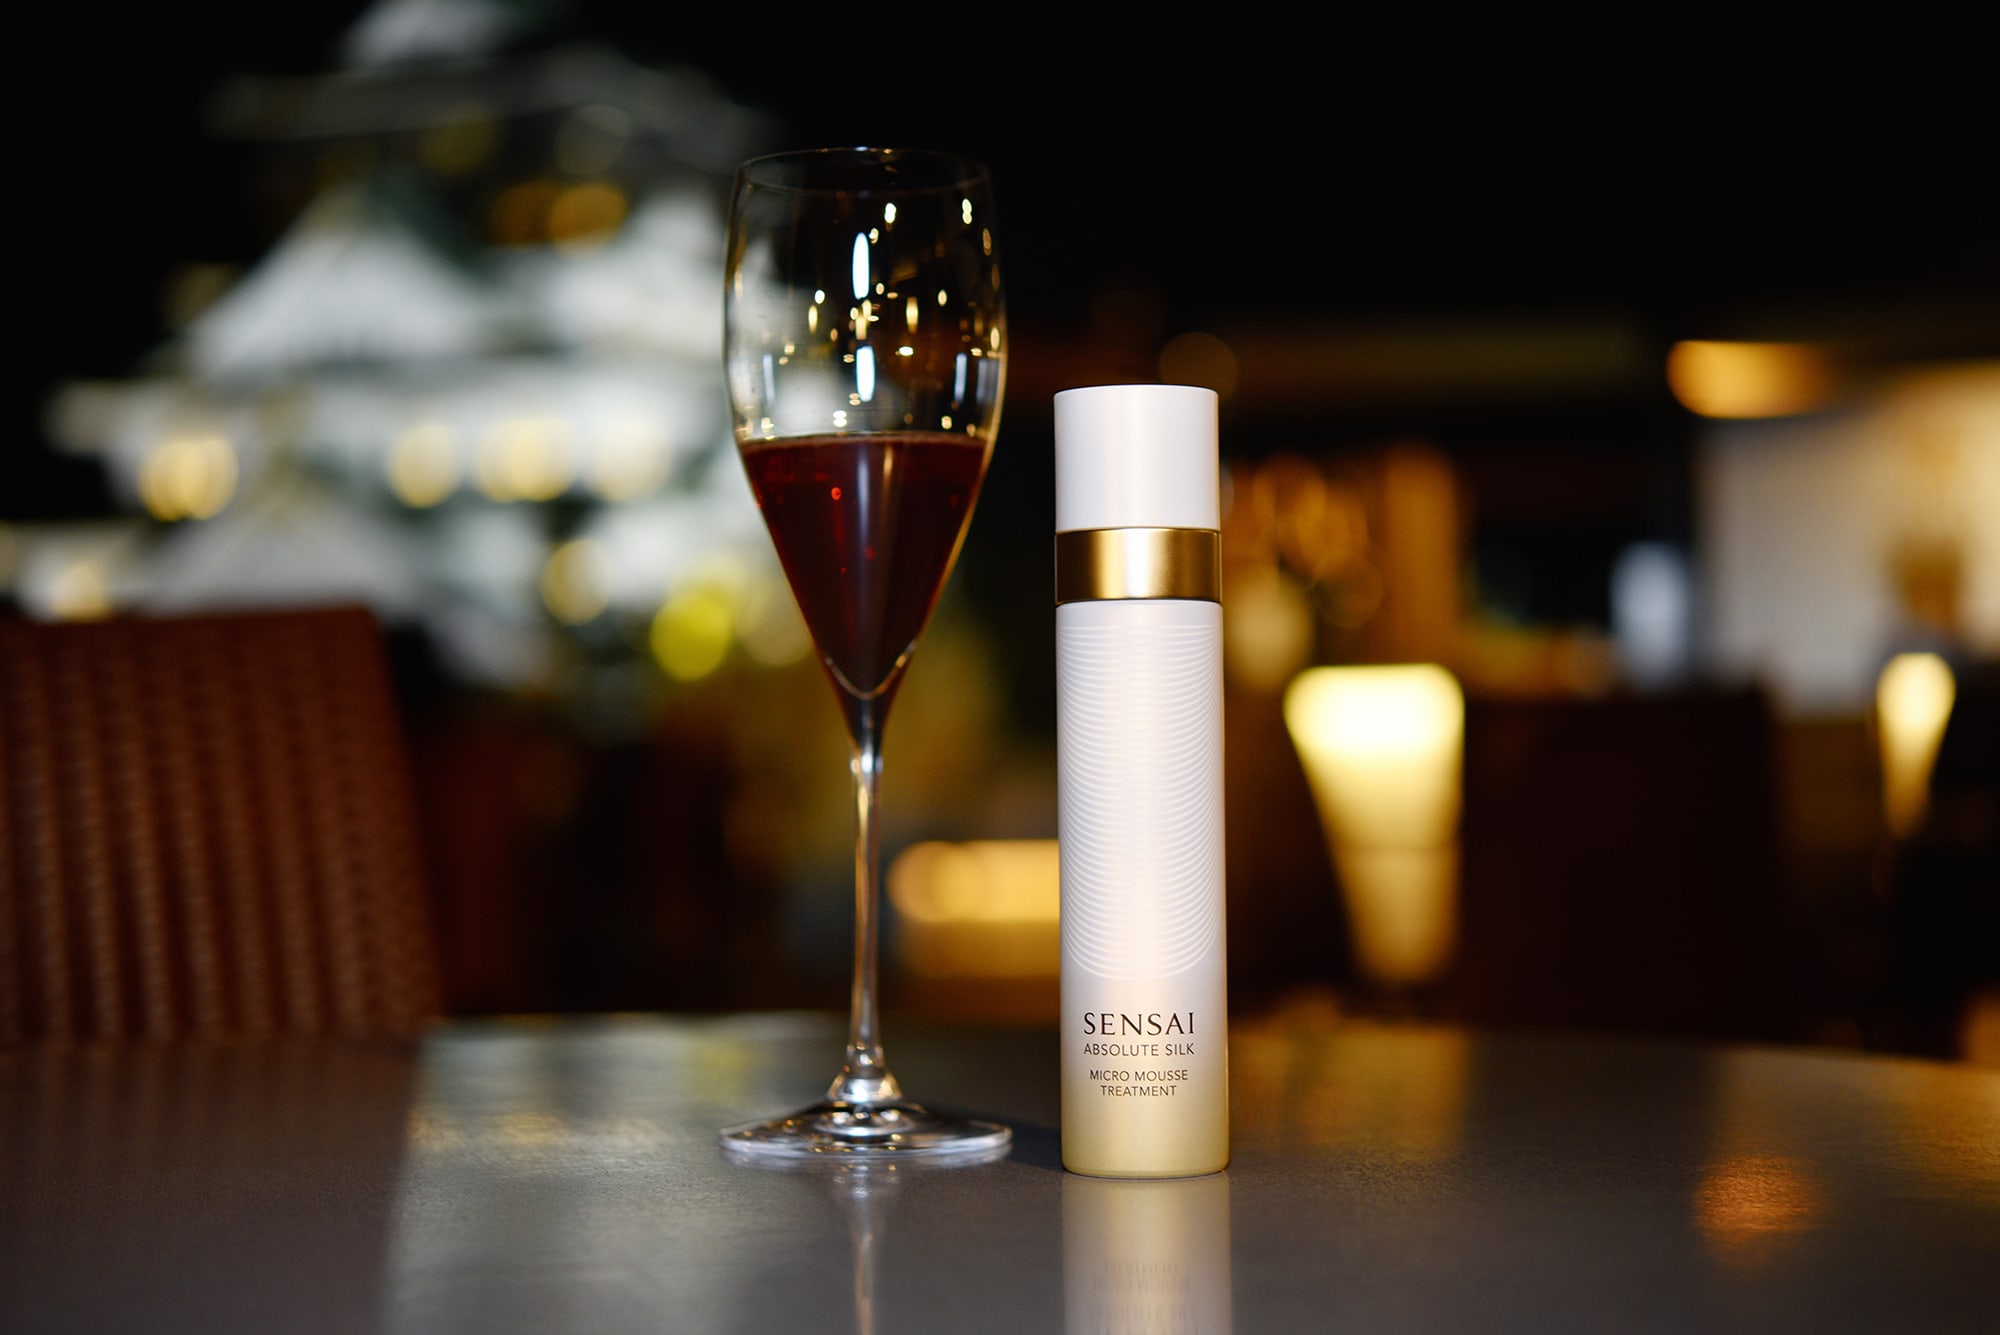 The SENSAI AS Micro Mousse Treatment became a surprising gift for the guests attending the Anniversary Grand Gala Dinner.